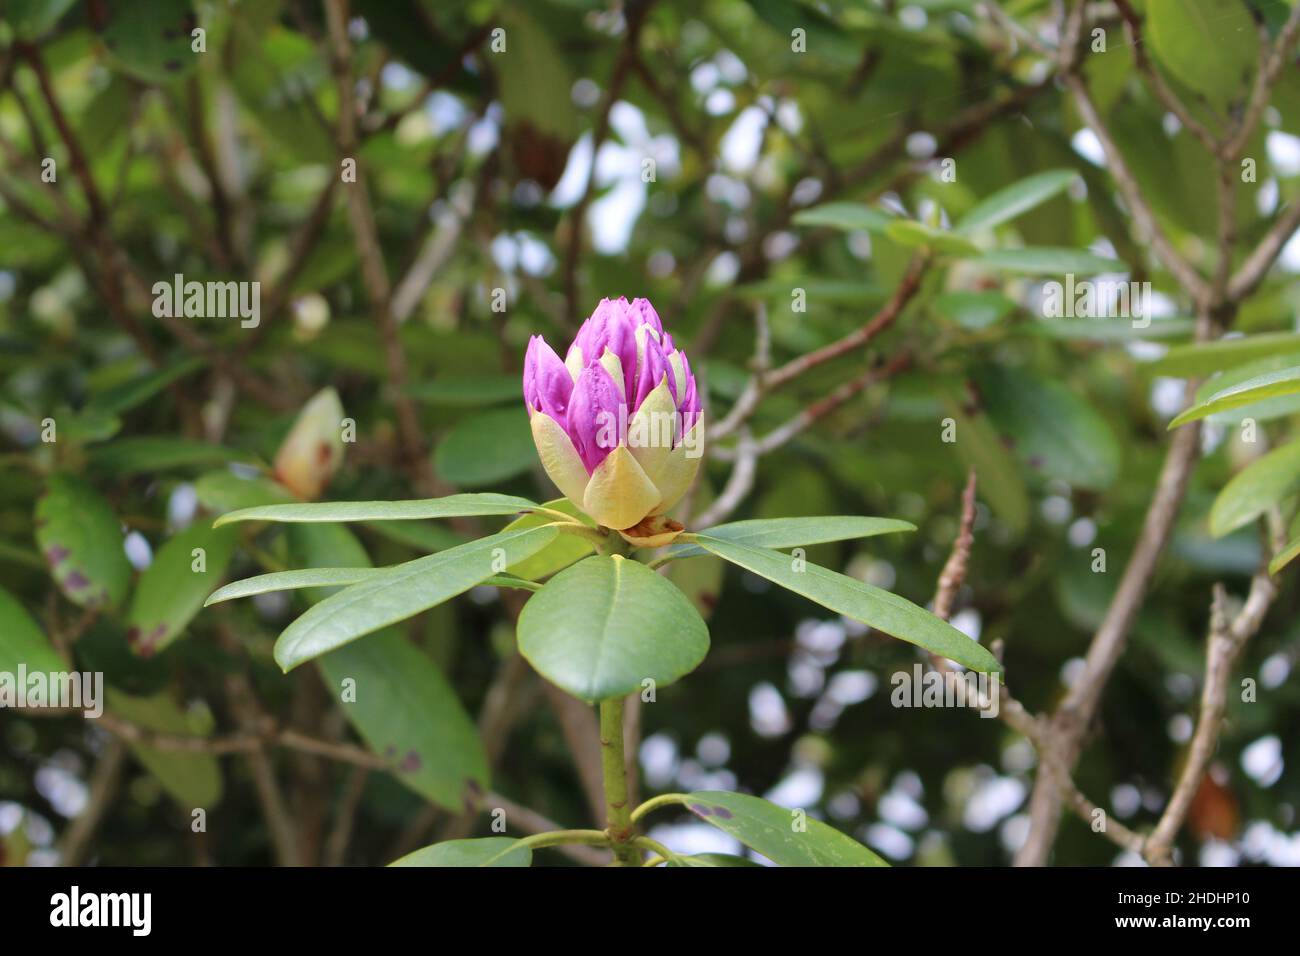 rhododendron flower, rhododendron flowers Stock Photo